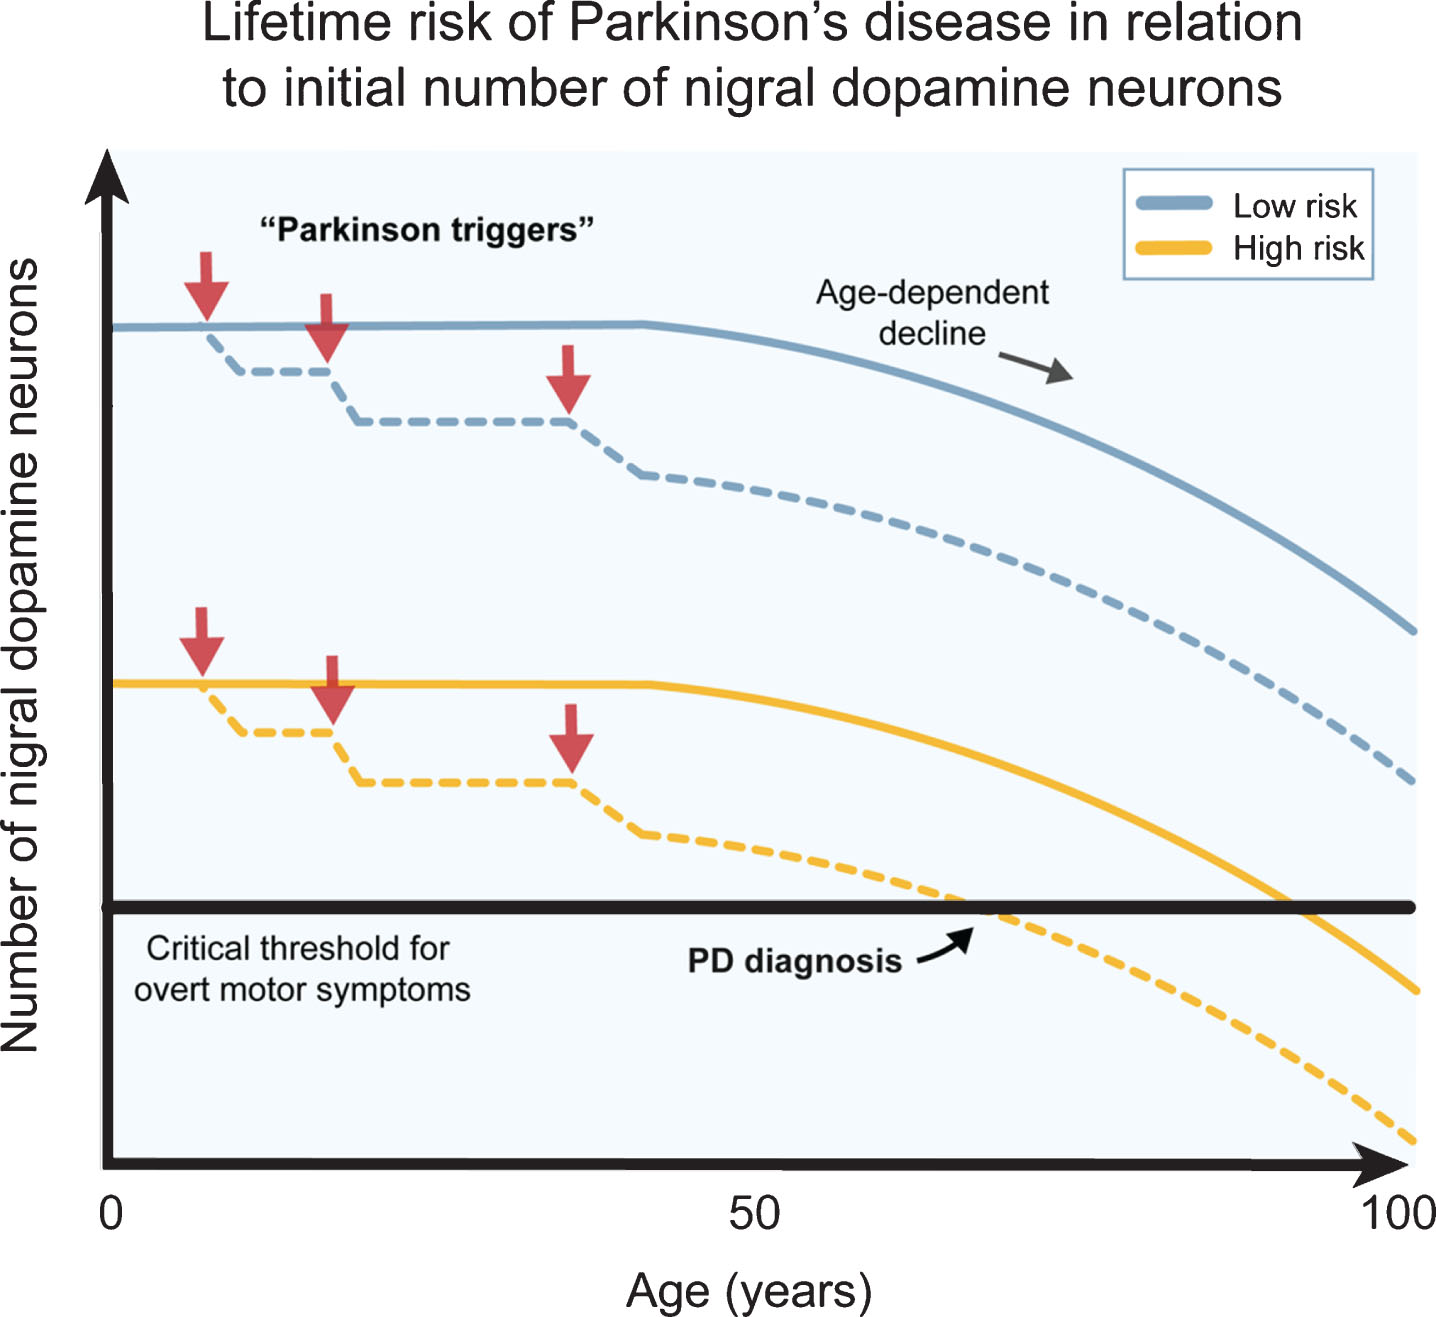 The number of dopamine neurons and Parkinson’s disease risk. Several genetic, epigenetic and non-genetic factors affect the generation of dopamine (DA) neurons and their survival during development and birth. This likely contributes to a natural high variation in healthy human subjects. Individuals born with higher number of DA neurons are more robust to Parkinson’s disease (PD) triggers (red arrows) since they can afford a higher cell loss before onset of motor symptoms (blue lines), while individuals born with a smaller starting population of DA neurons can afford a much lower cell loss from the exposure to PD triggers before the onset of motor symptoms (yellow lines). The combination of PD triggers and the natural age-related decline of DA neurons may therefore put some individuals at a greater lifetime risk of acquiring PD motor symptom. The DA neuron pool from birth may therefore be an important parameter when considering PD risk.